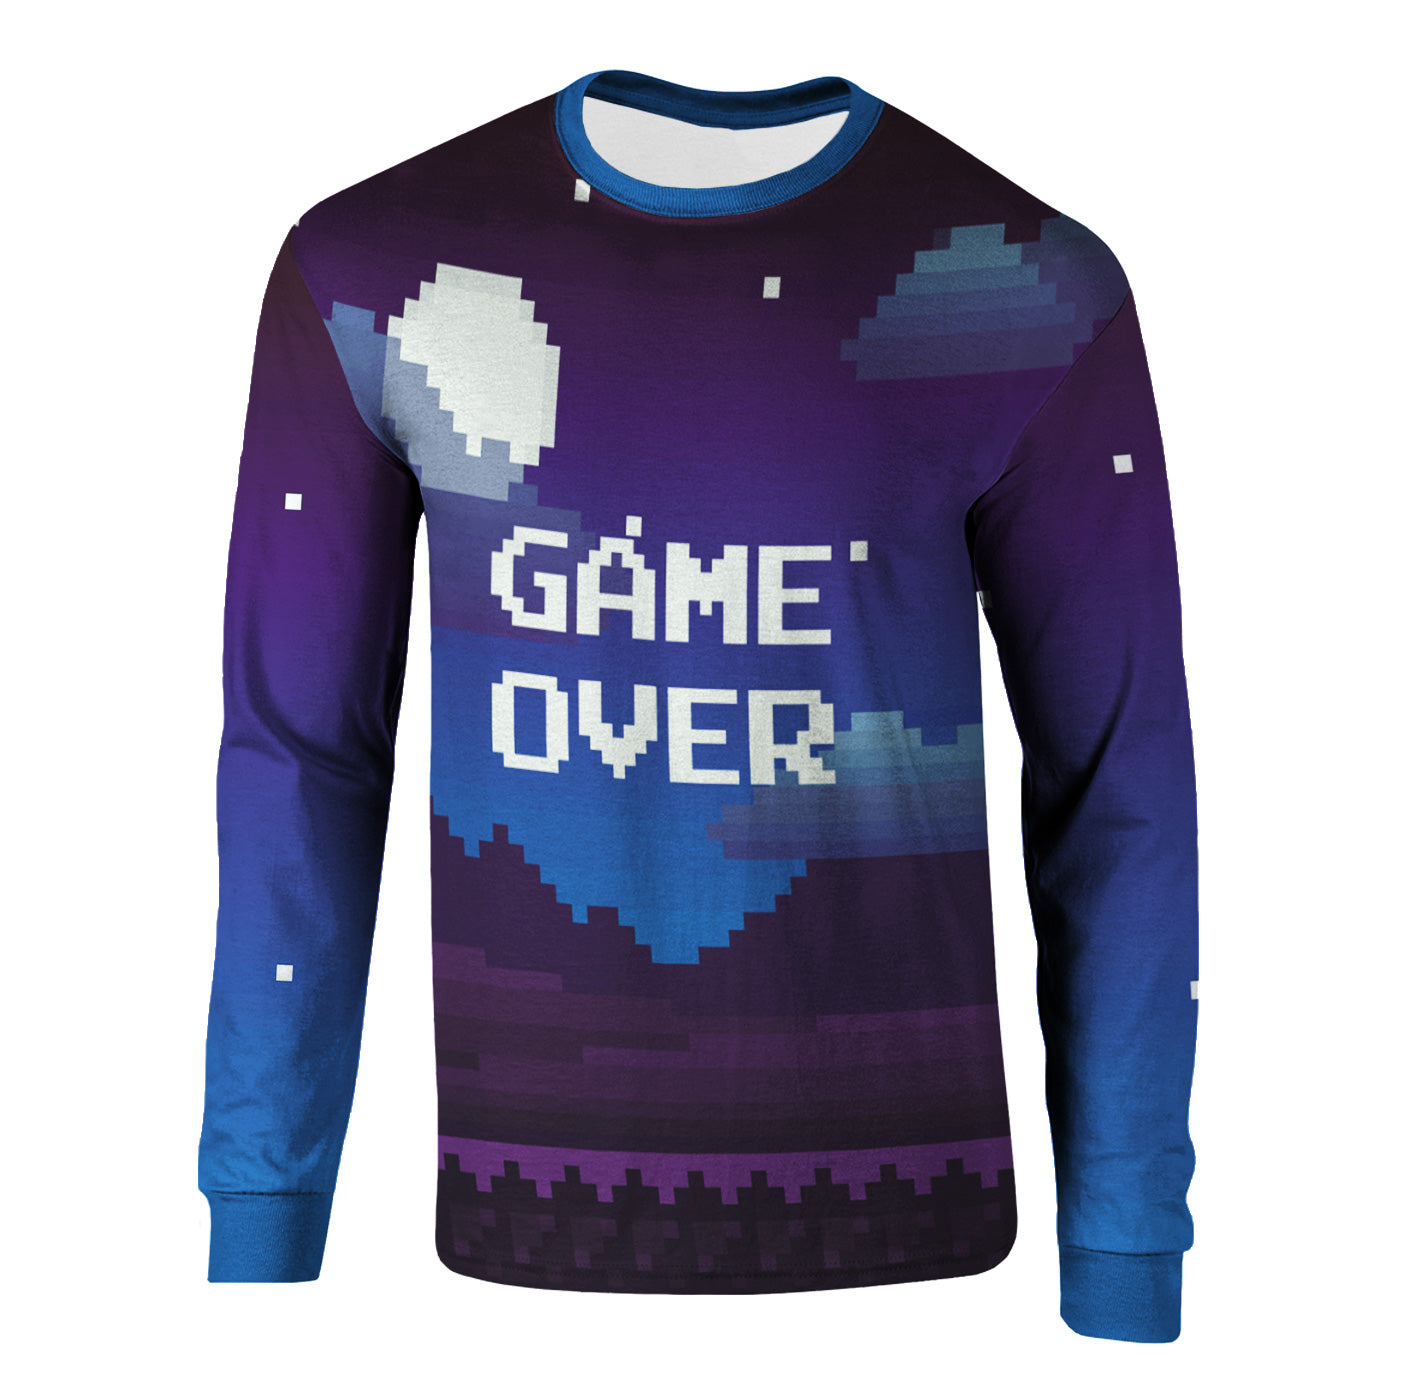 Pixel Game Over Long Sleeve Shirt